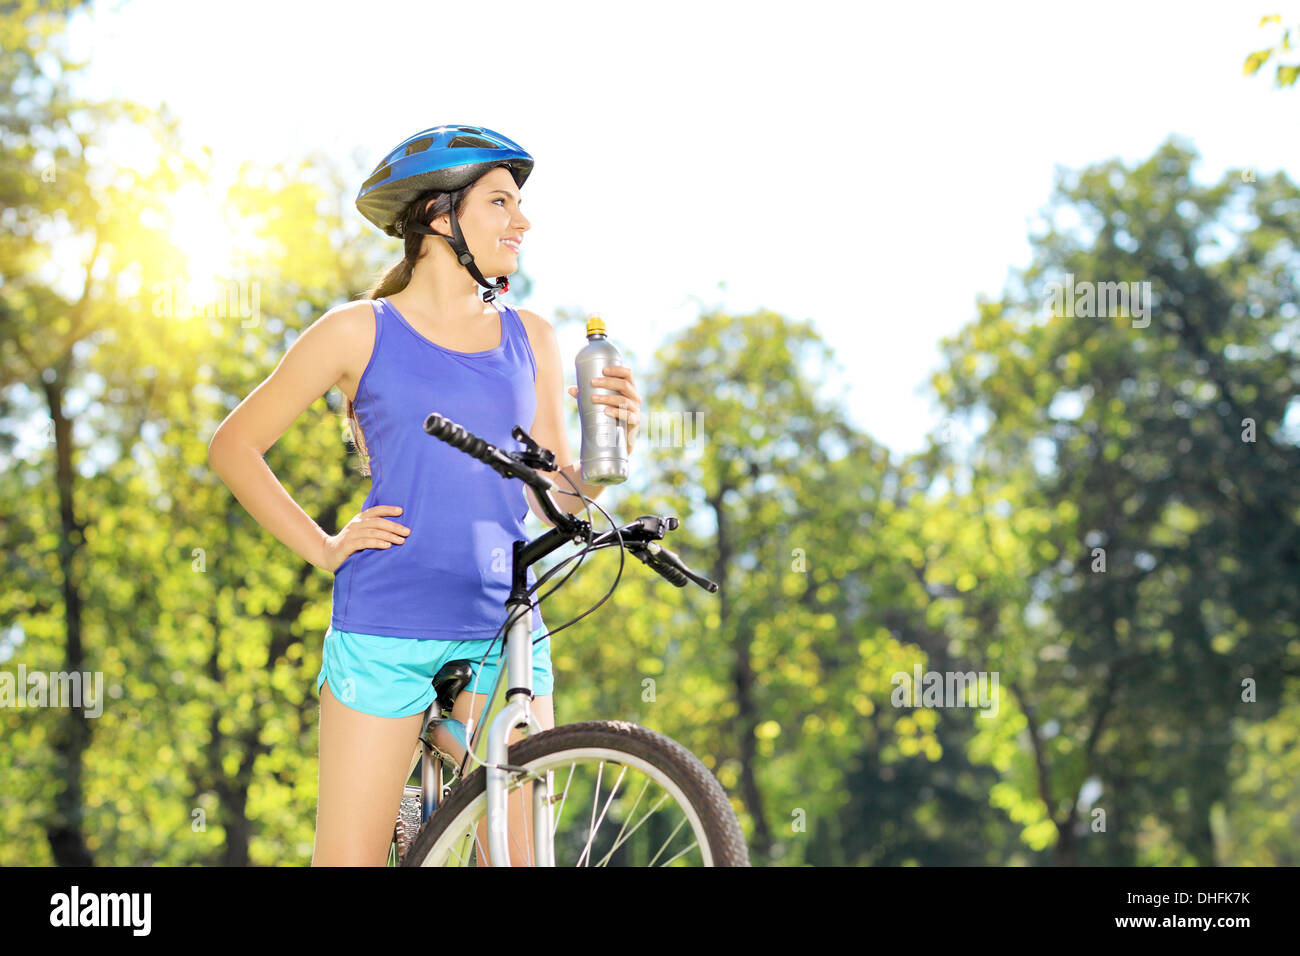 Young female biker posing on a bike outdoor on a sunny day Stock Photo